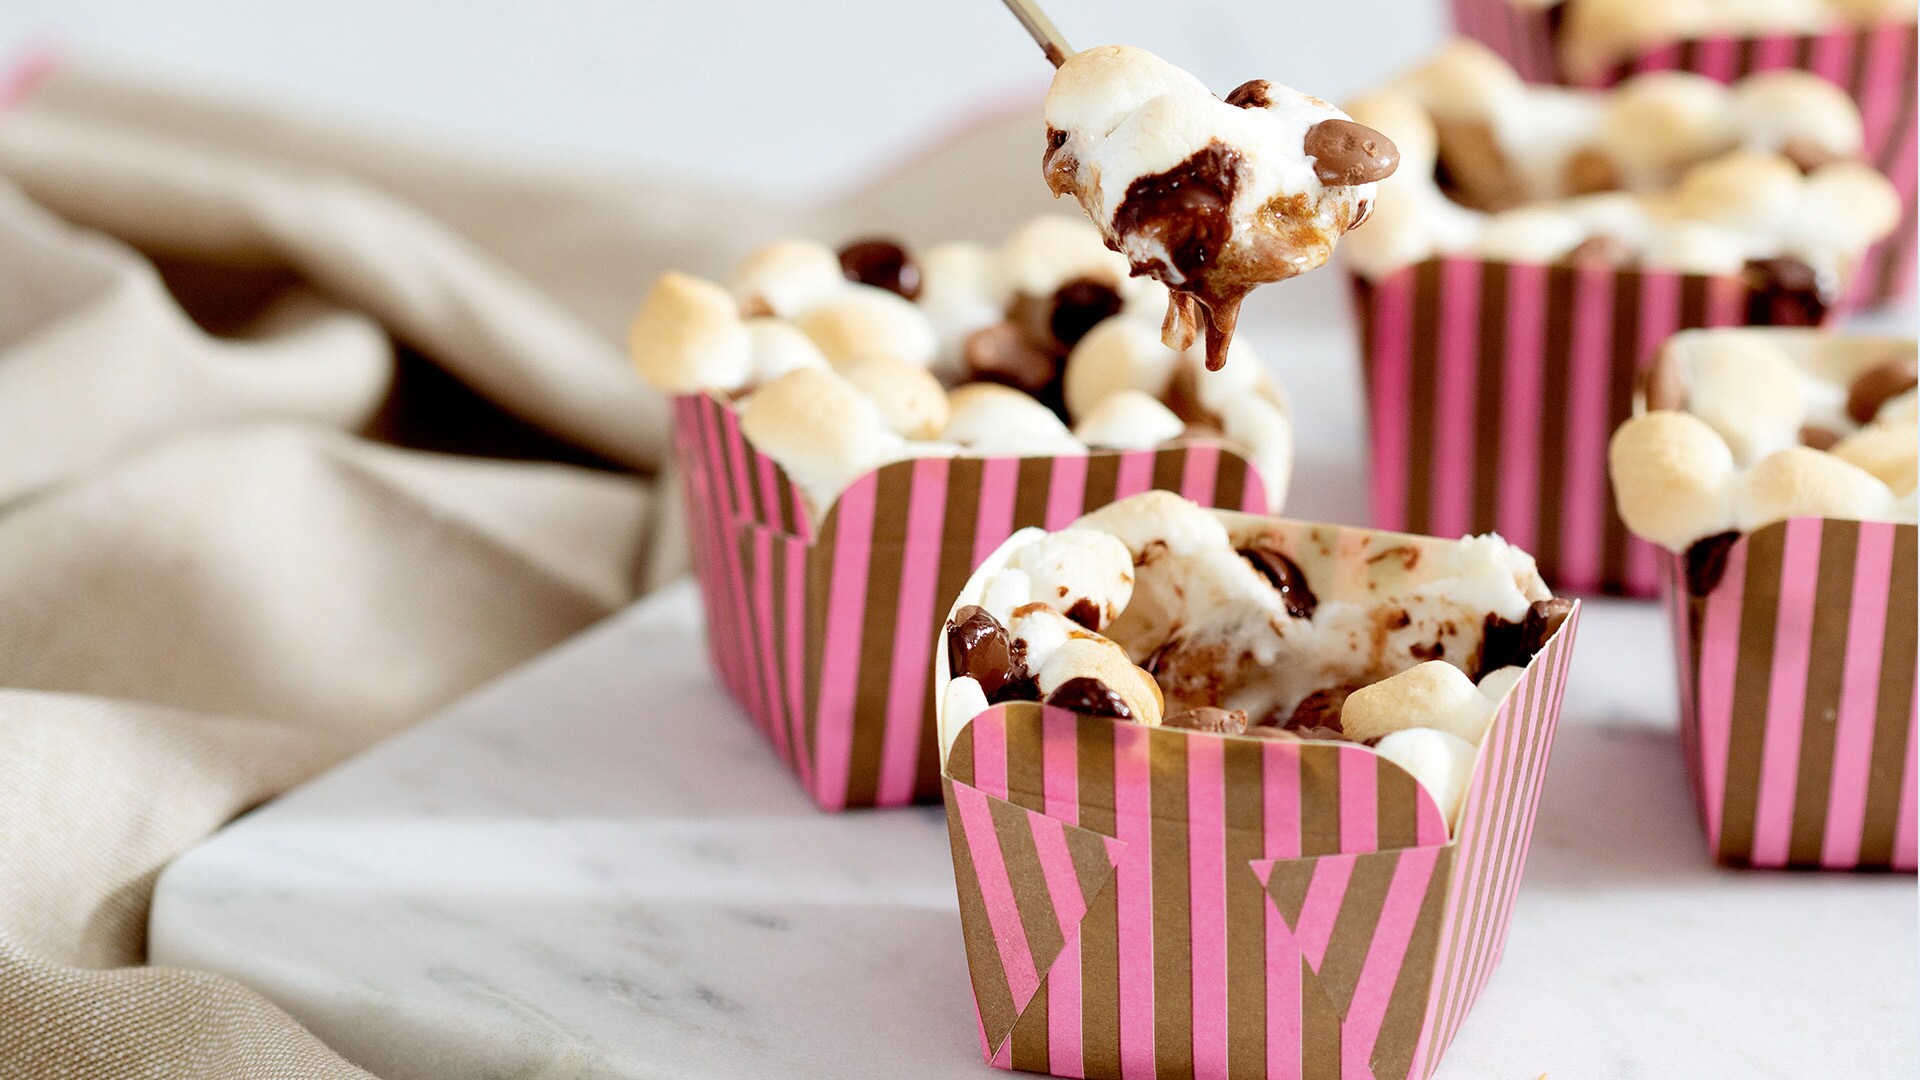 Ctv Your Morning S E This Mouth Watering Recipe Lets You Enjoy Smores At Home No